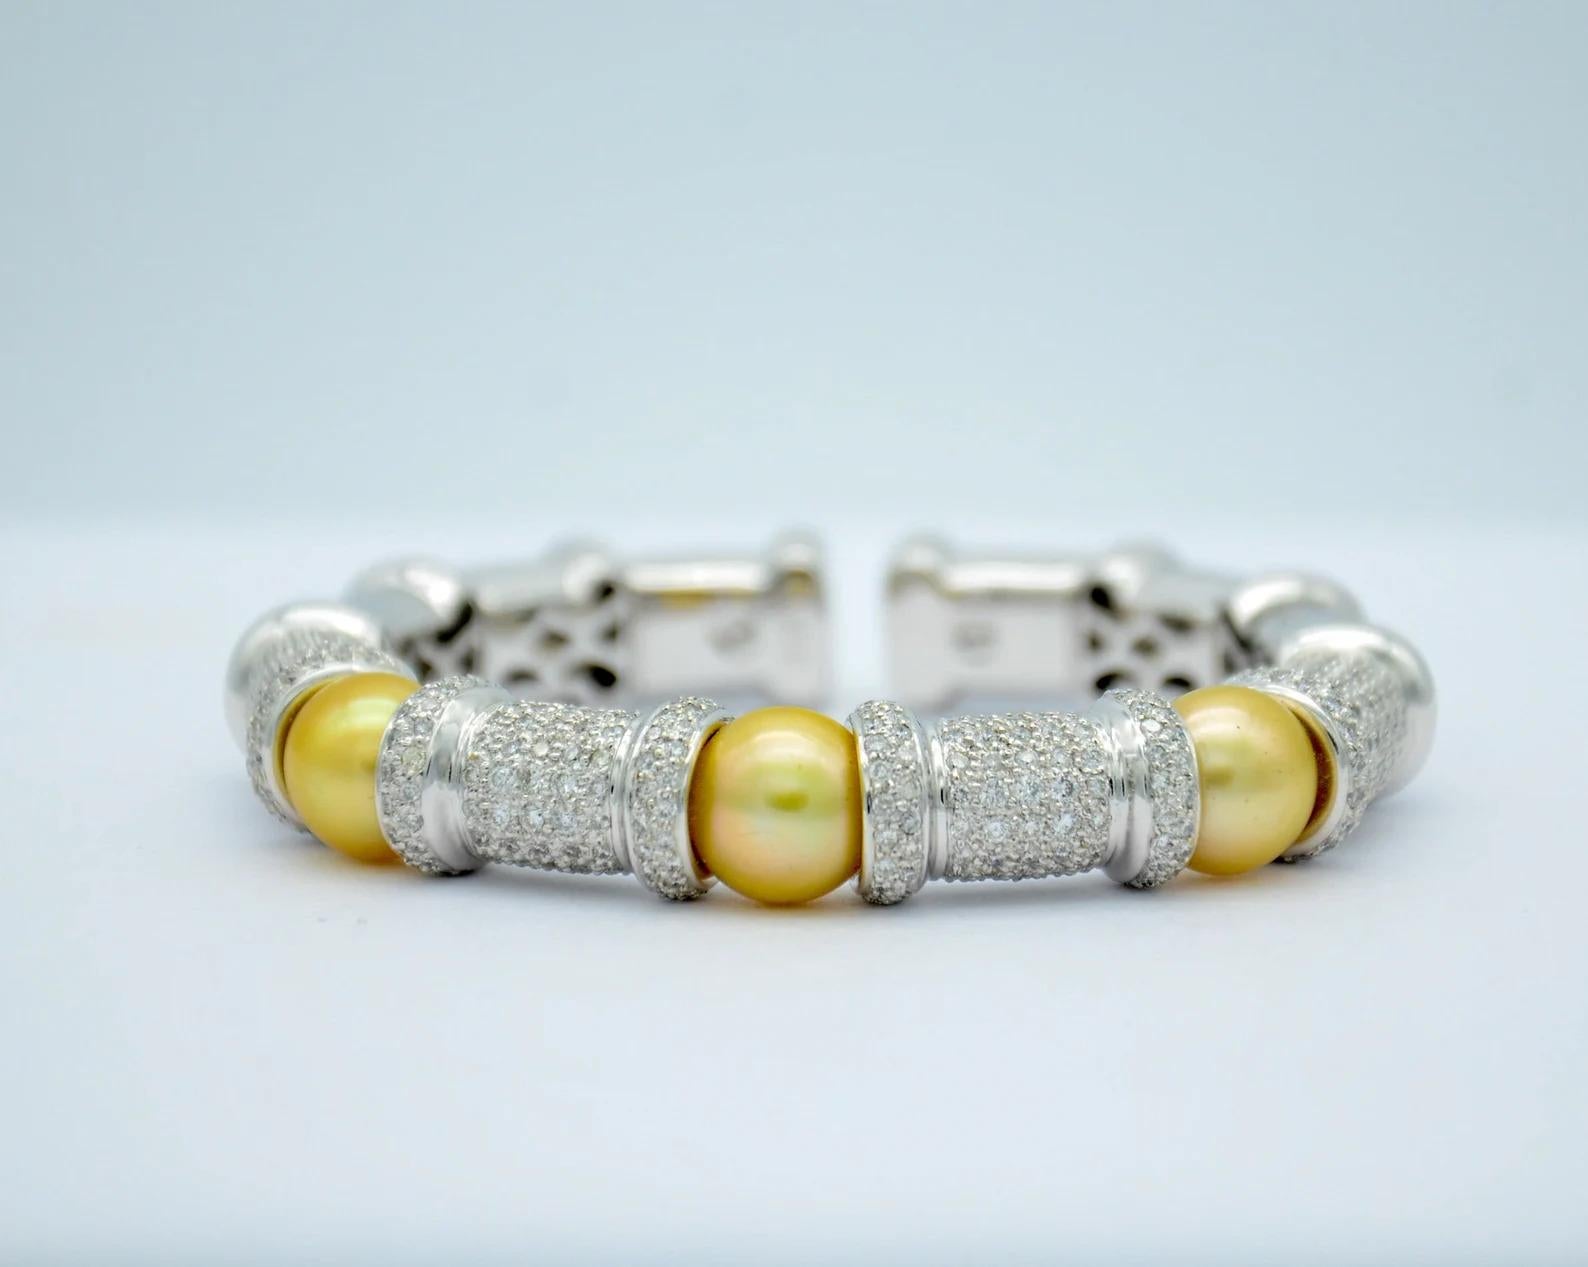 This beautiful bangle flexes to fit over your hand and onto your wrist. This unique bracelet is made from yellow pearls and white gold for a subtle, elegant look. This is perfect for ladies seeking essentials to build their jewelry collection.

18K